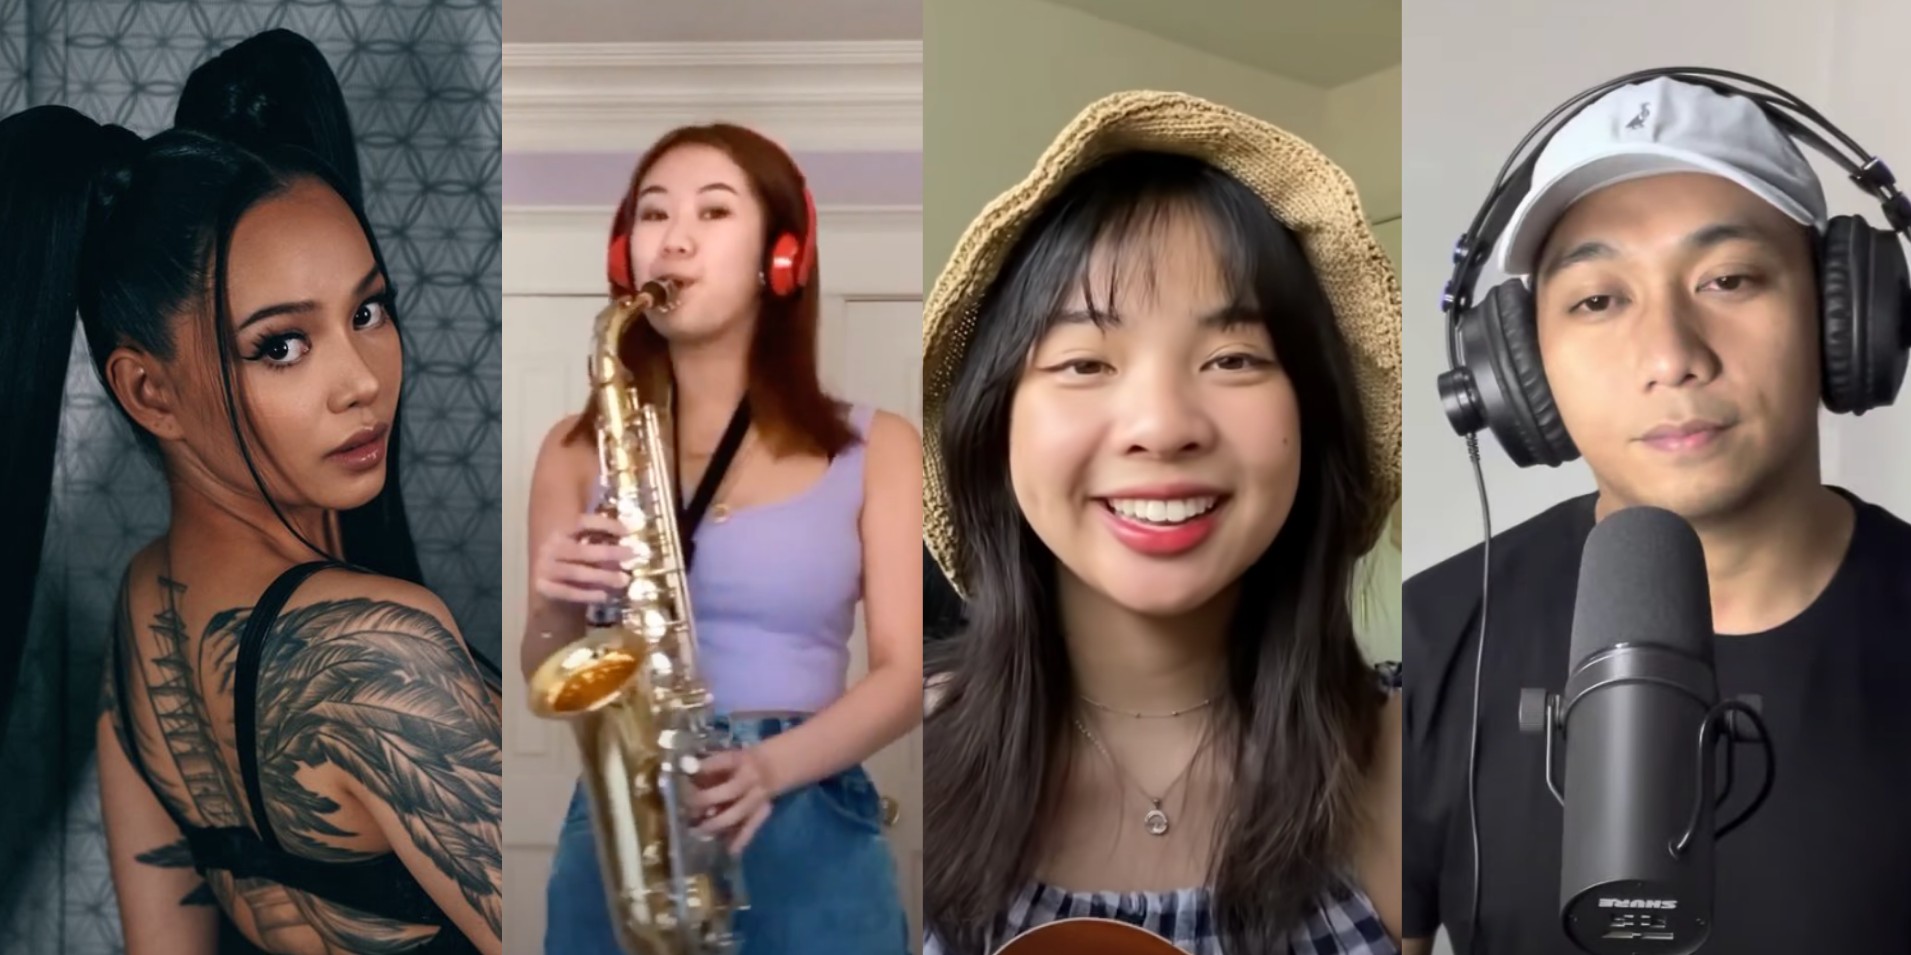 9 Asian musicians on TikTok that deserve a follow, including Bella Poarch, Chevy, Francis Greg, Alsa Aqilah, and more